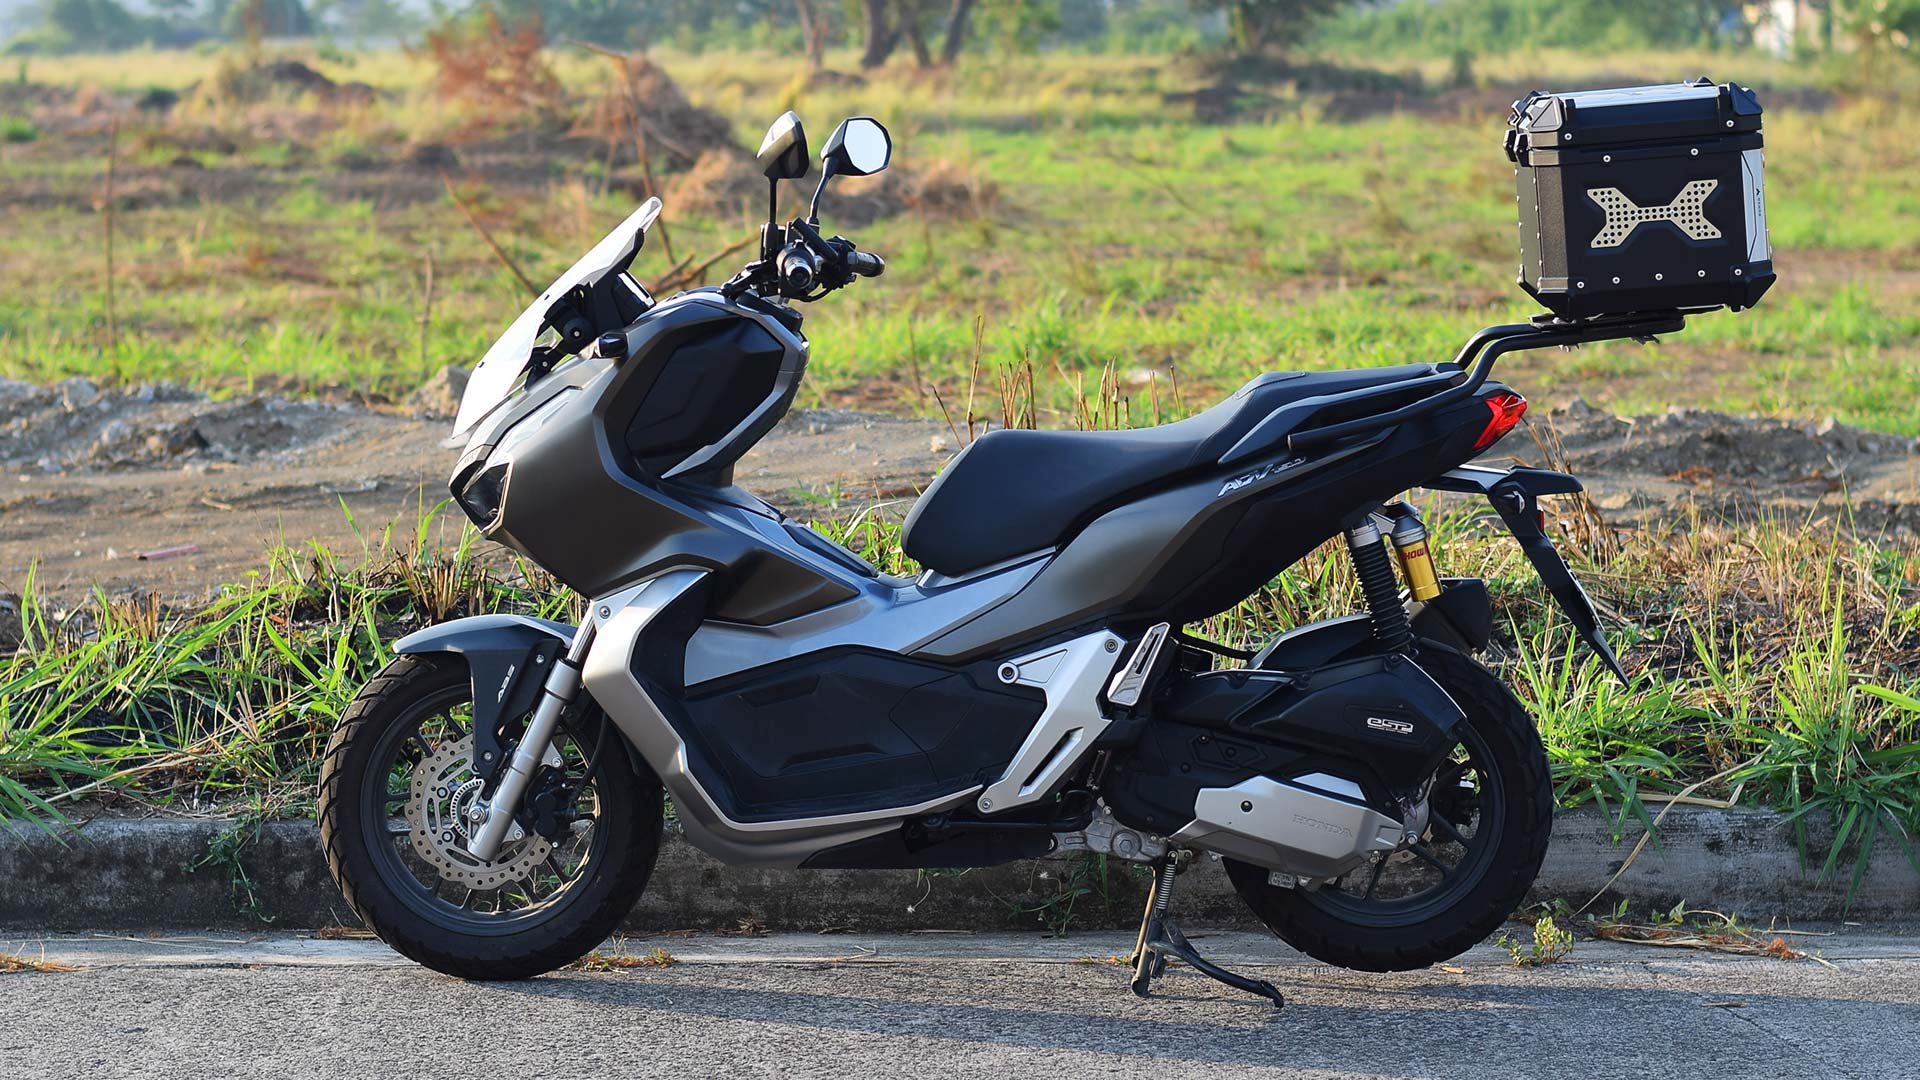 Honda Adv 150 Long Term Review Specs Features Price